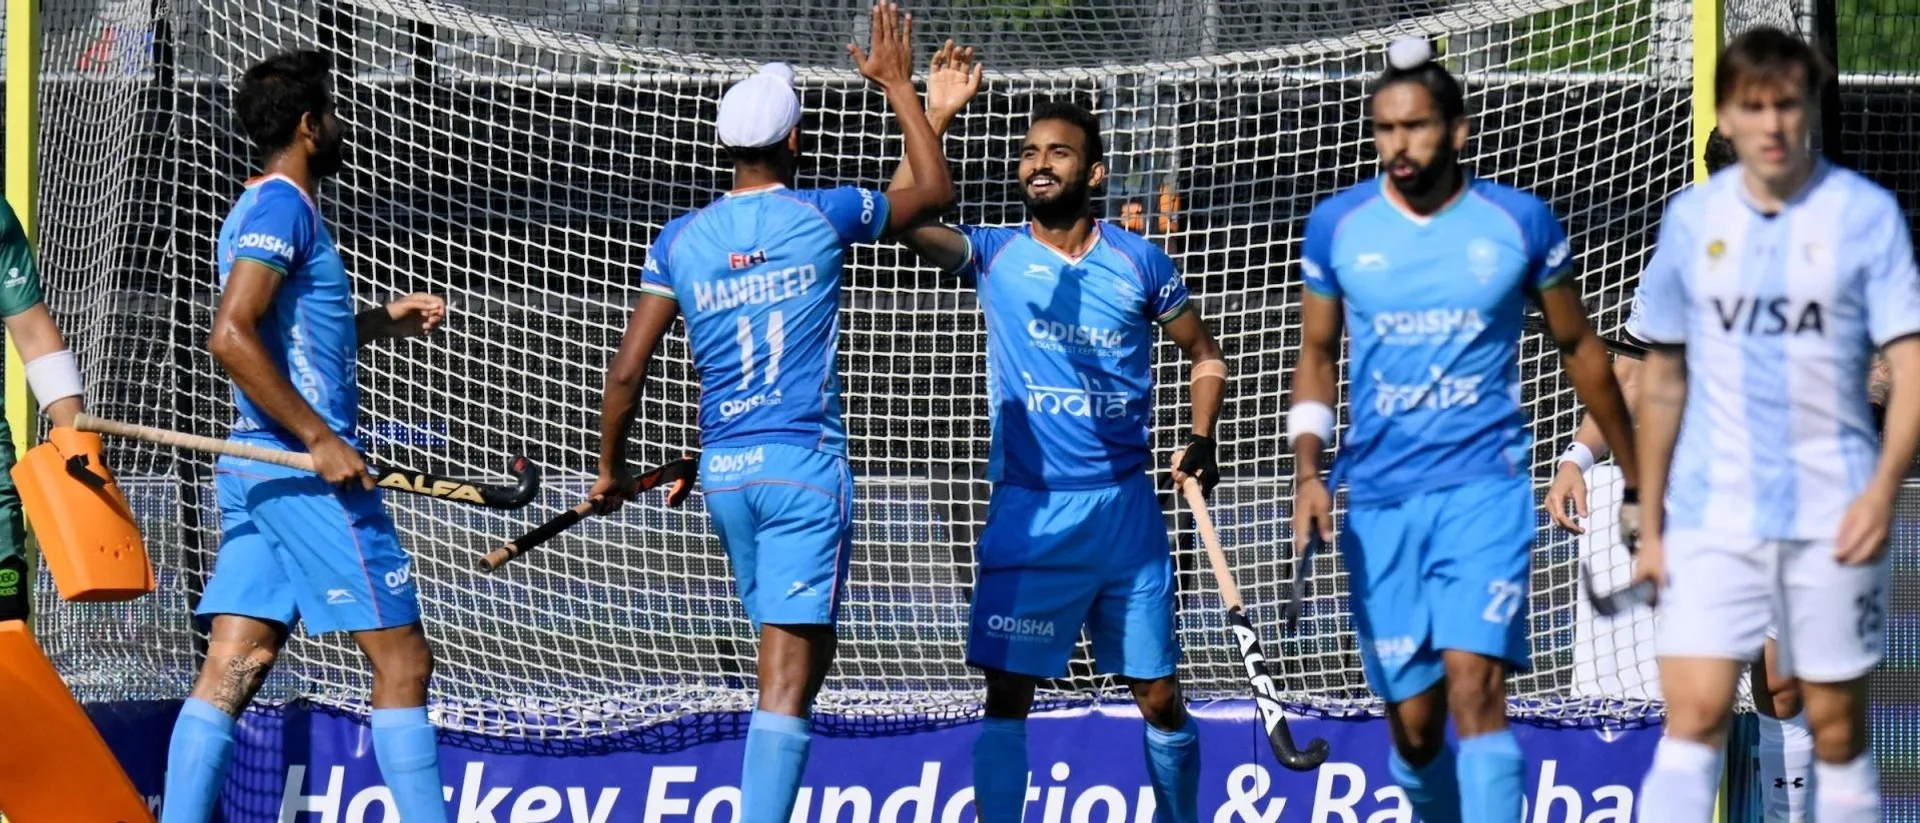 India end season with 2-1 win over Argentina, remain top of point table